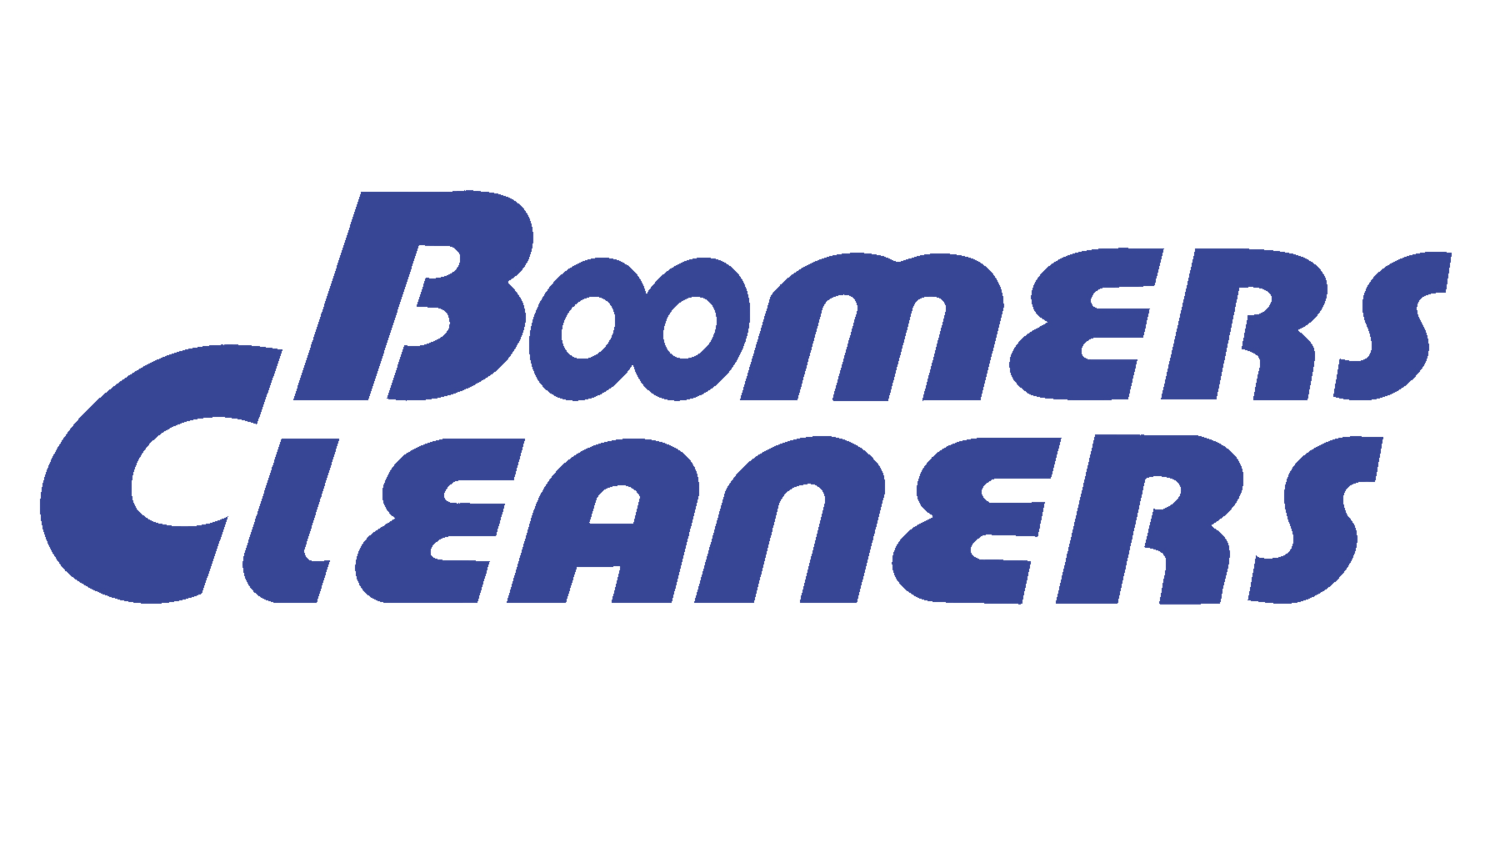 Boomers Cleaners | West Michigan's Best Carpet Cleaner